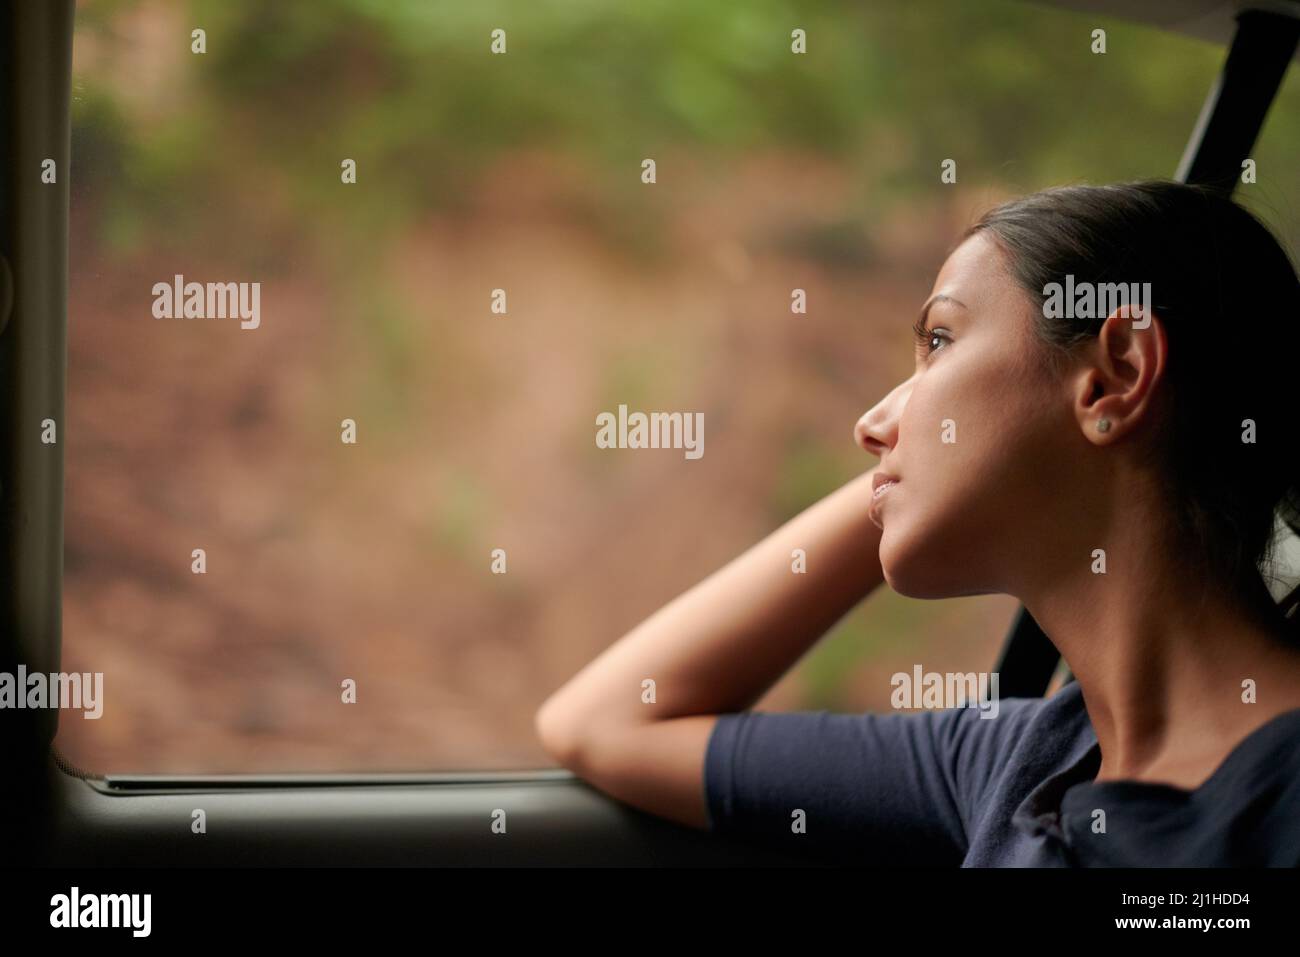 A long journey ahead. A beautiful woman looking out of a car window. Stock Photo